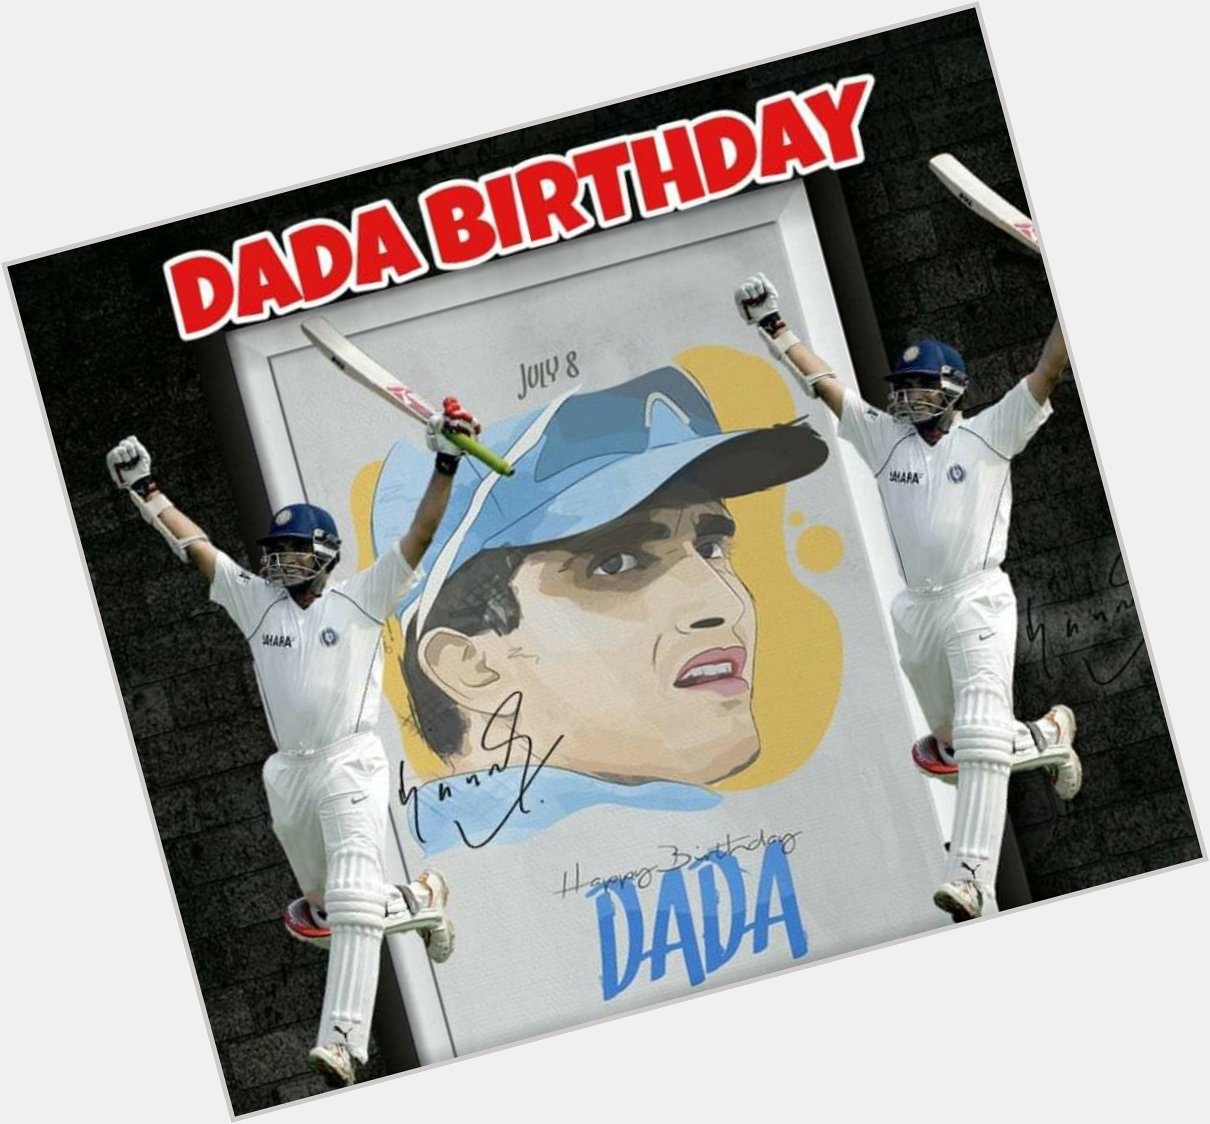 My favourite Indian captain Sourav Ganguly Happy Birthday Dada good team leader 2003 final world cup I miss you 